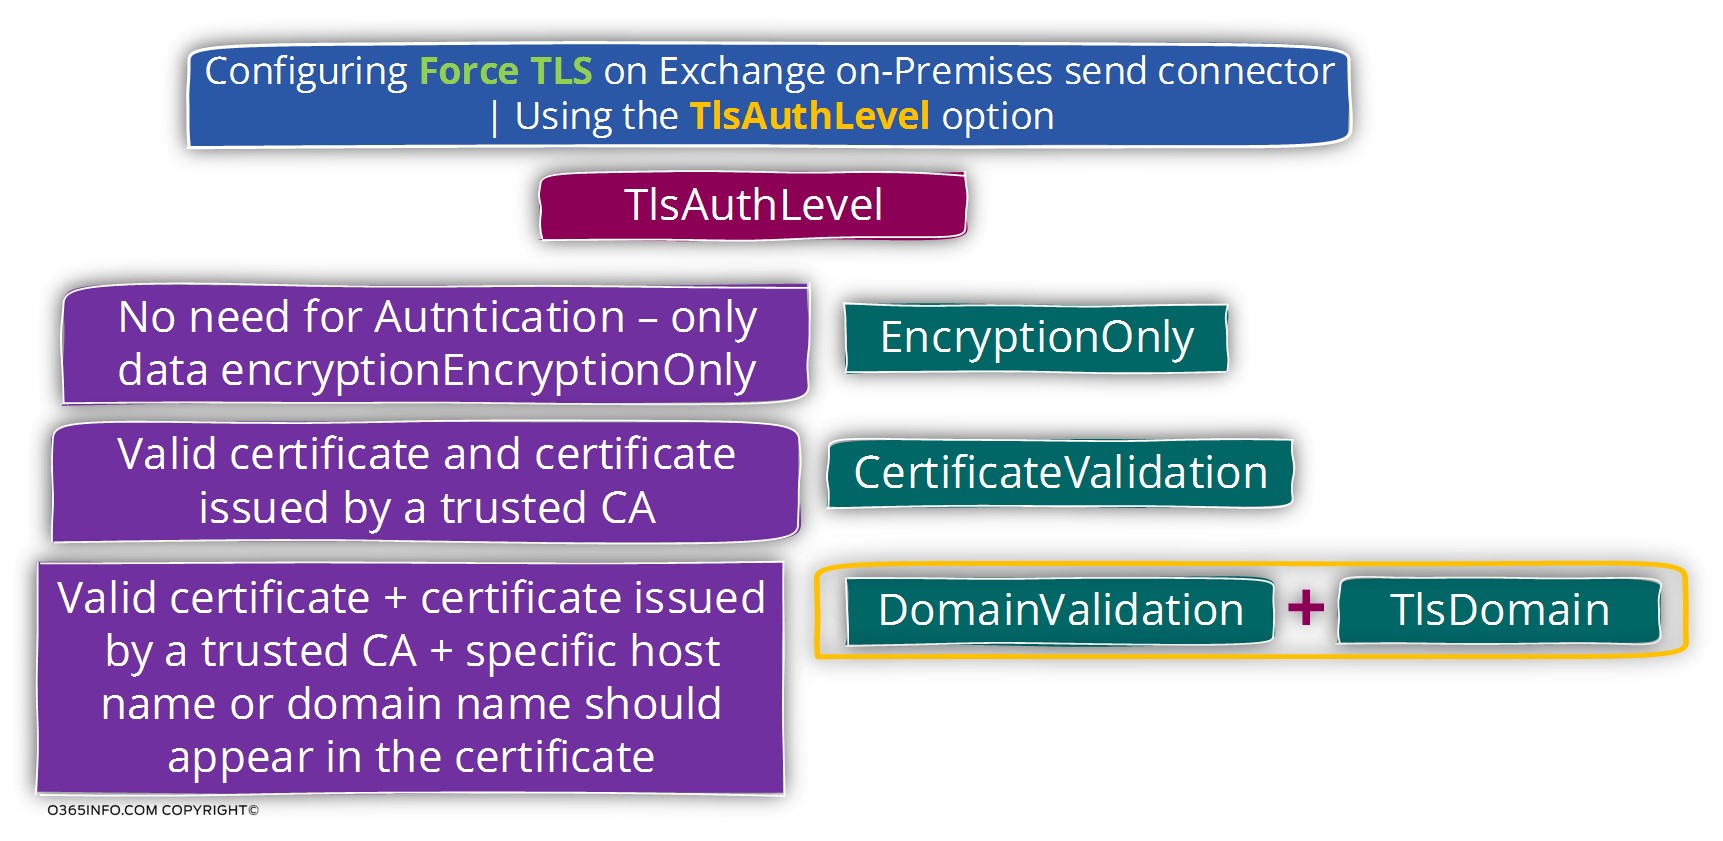 Configuring Force TLS on Exchange on-Premises send connector - Using the TlsAuthLevel option-02